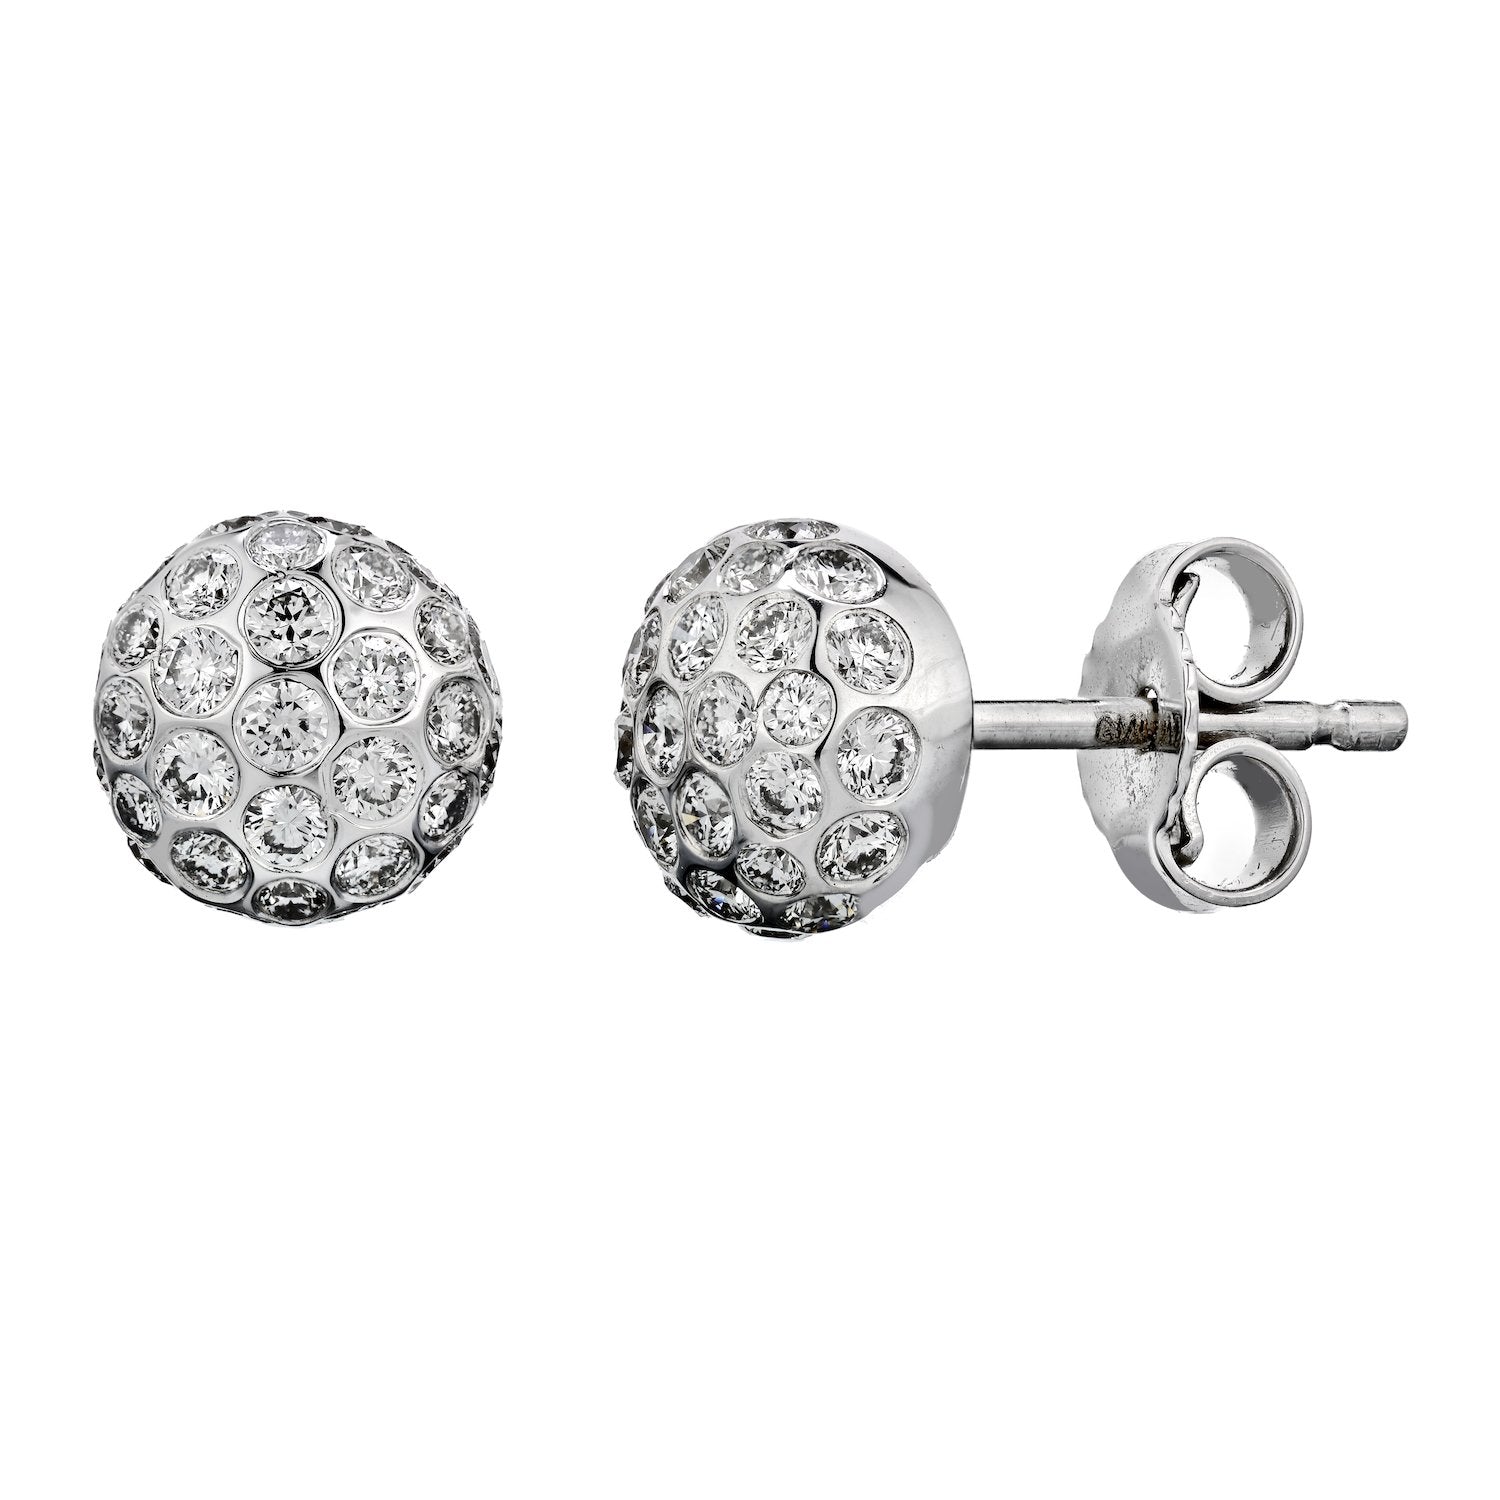 Diamond Ball Stud Earrings with Friction Post and Backs - The Diamond Channel